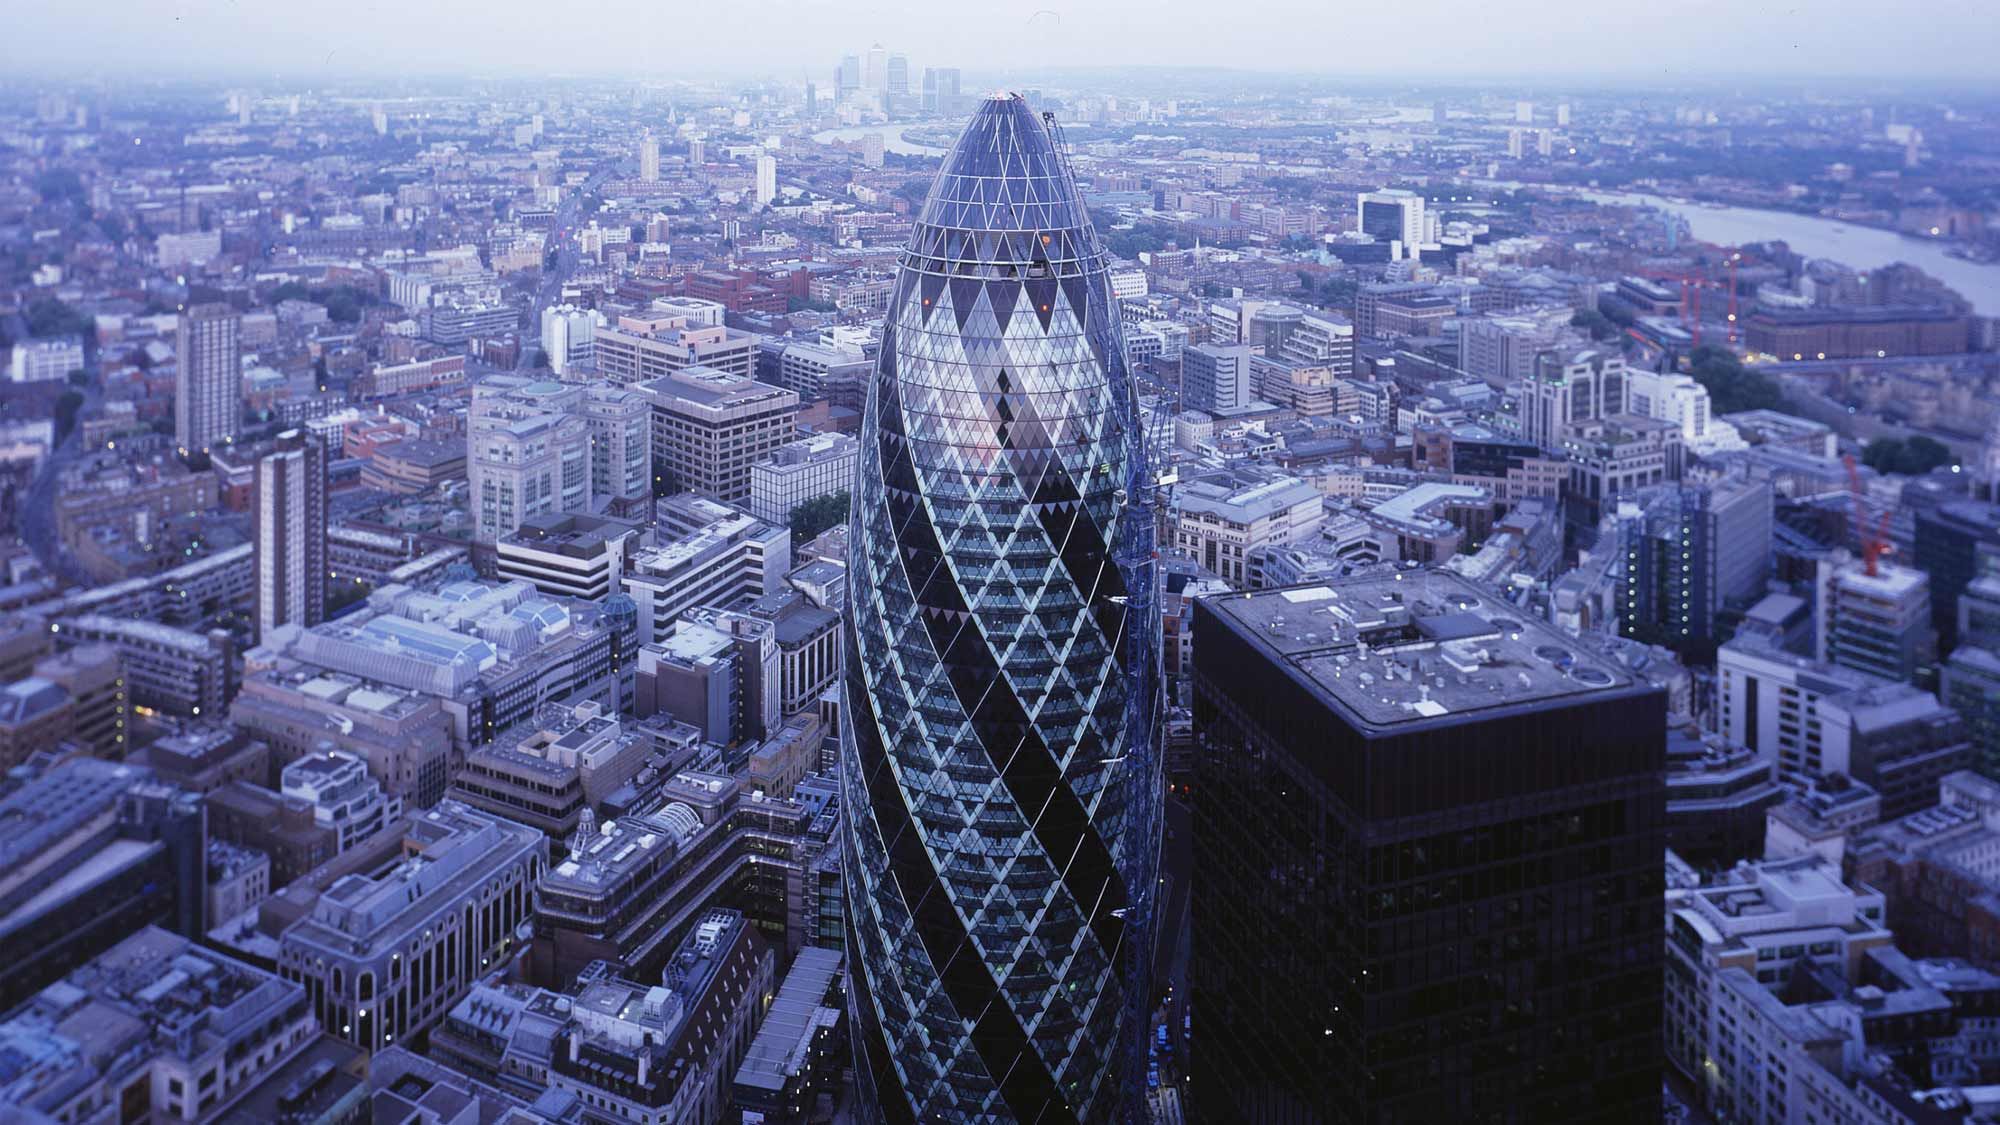 The view of 30 St Mary Axe towering over nearby buildings